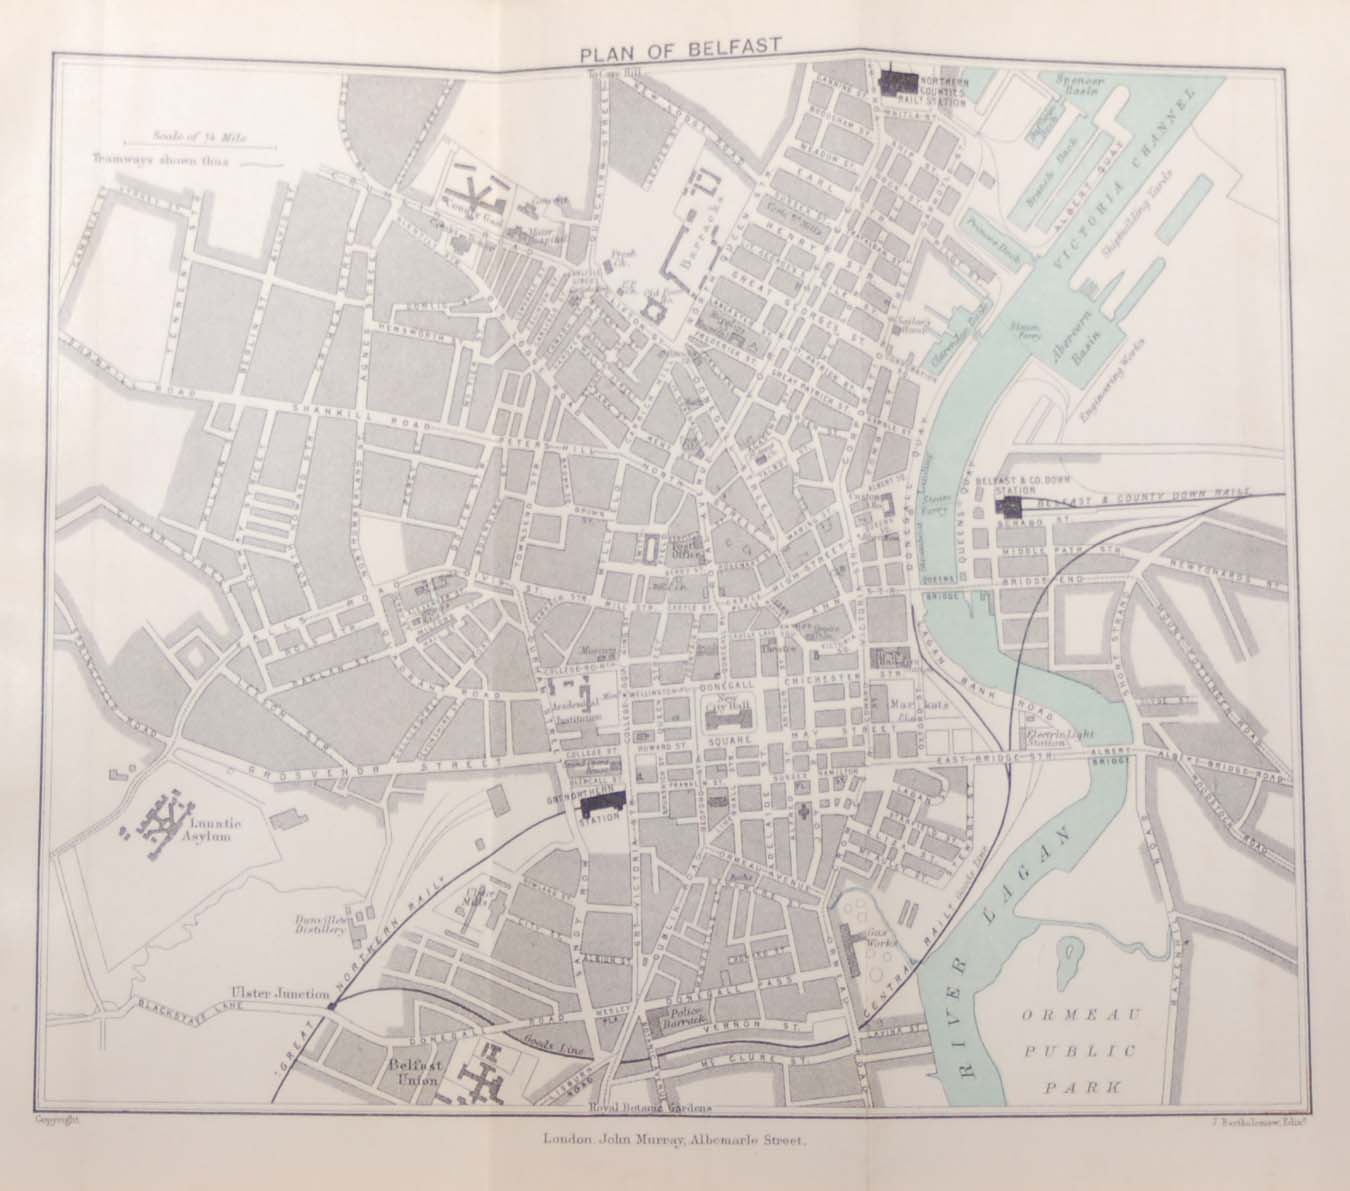 Antique plan, a map of Belfast from 1902. The map was originally produced as part of a guide for visitors to Ireland.